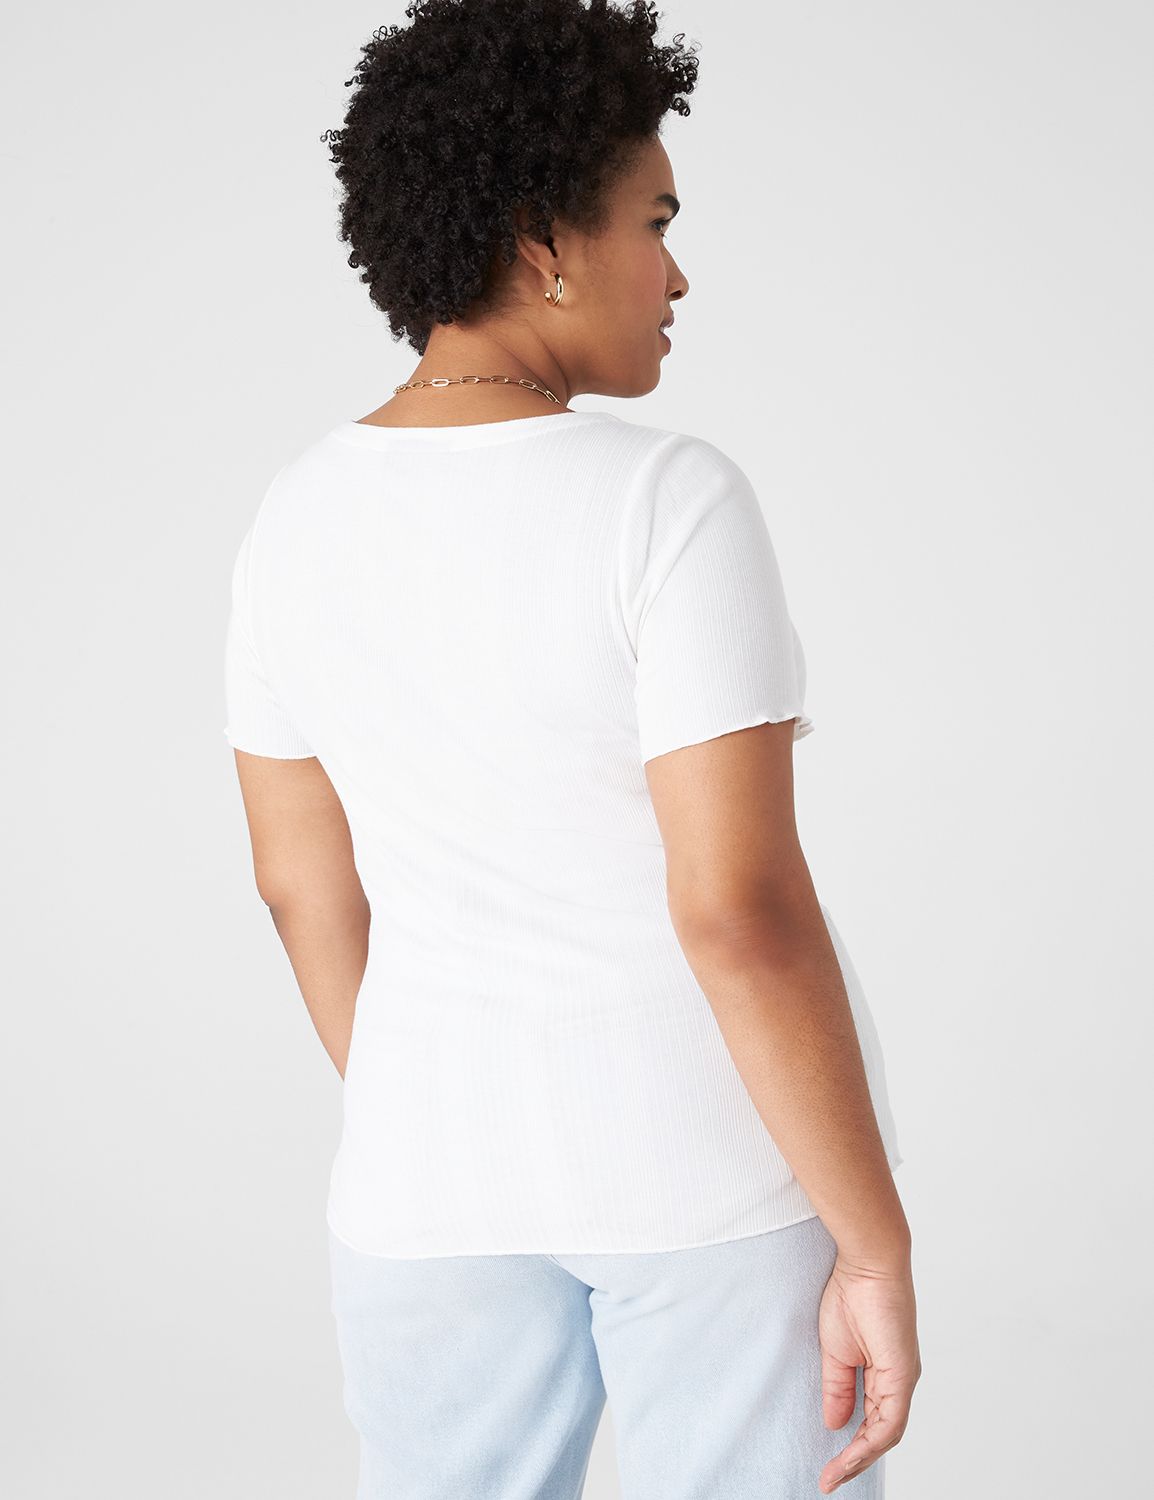 Fitted Short Sleeve Button Front De | LaneBryant